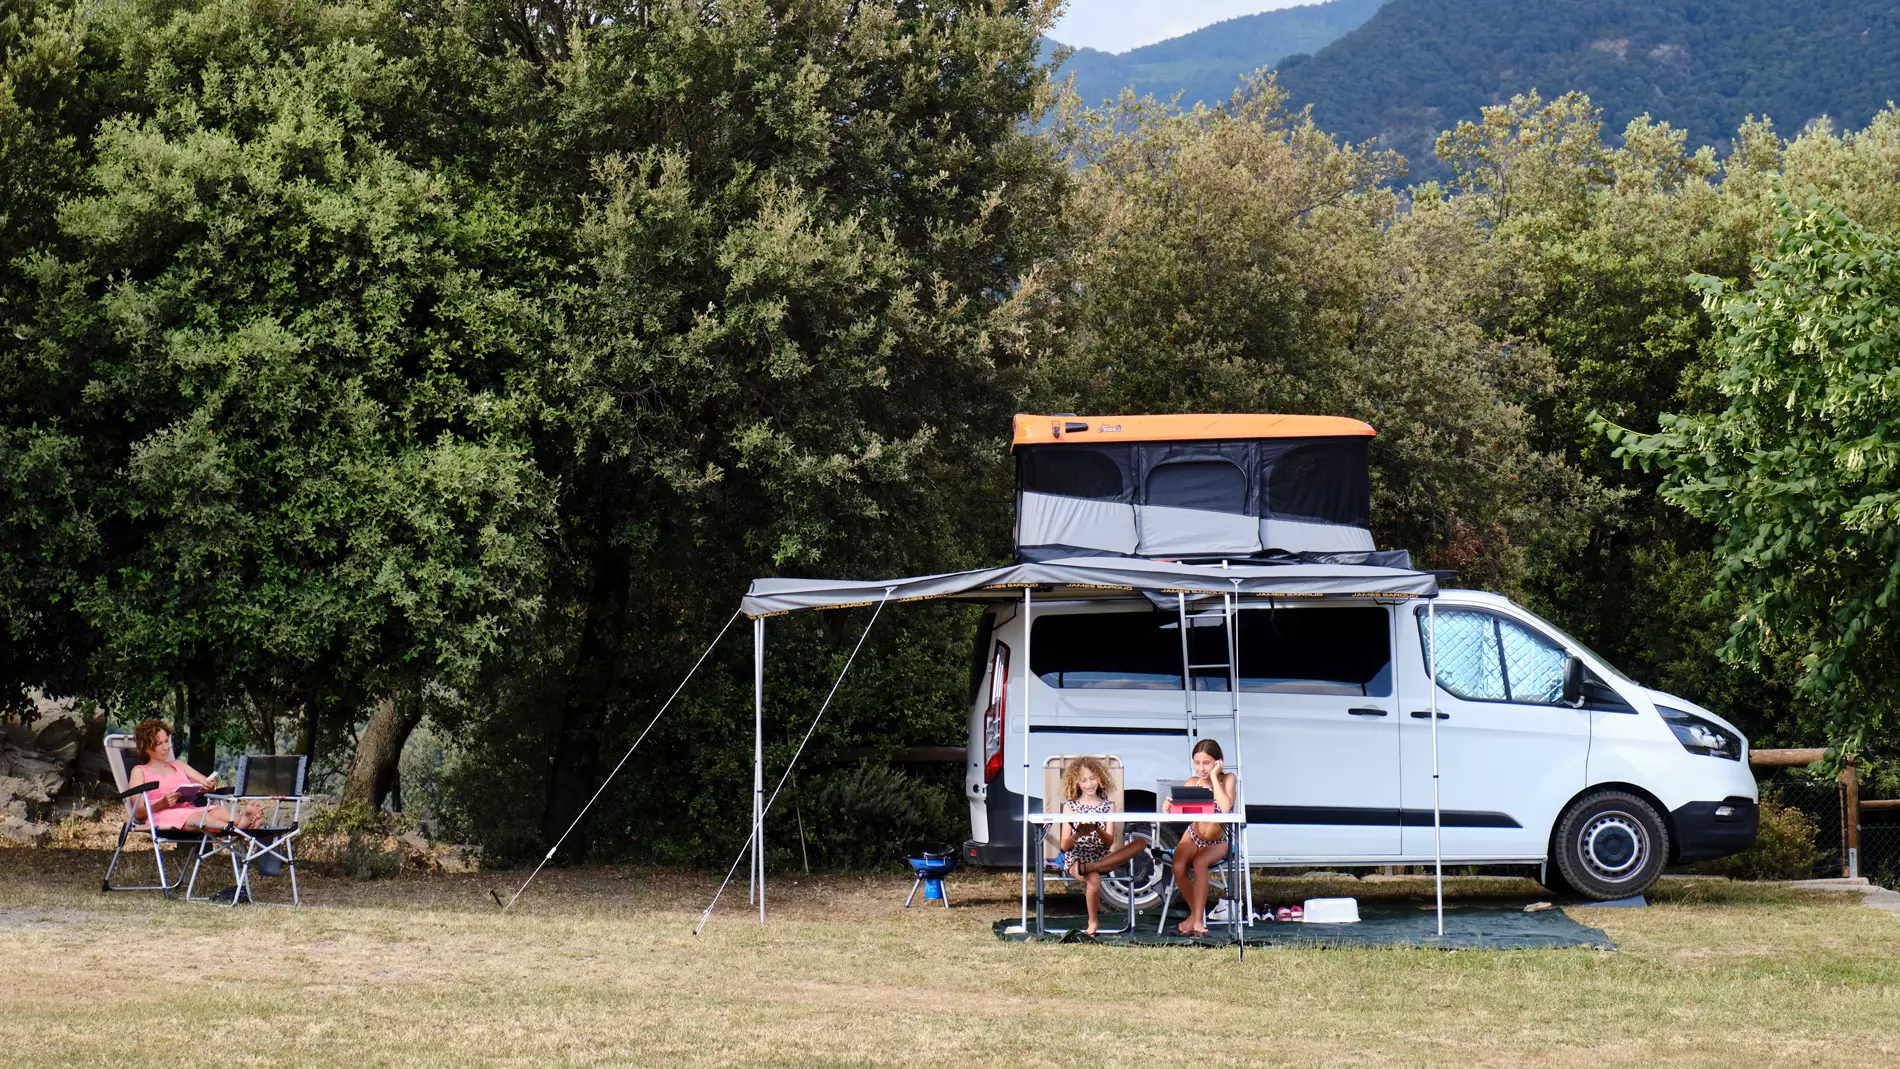 Joan Vendrell and his family camping with an Orange James Baroud Evasion  